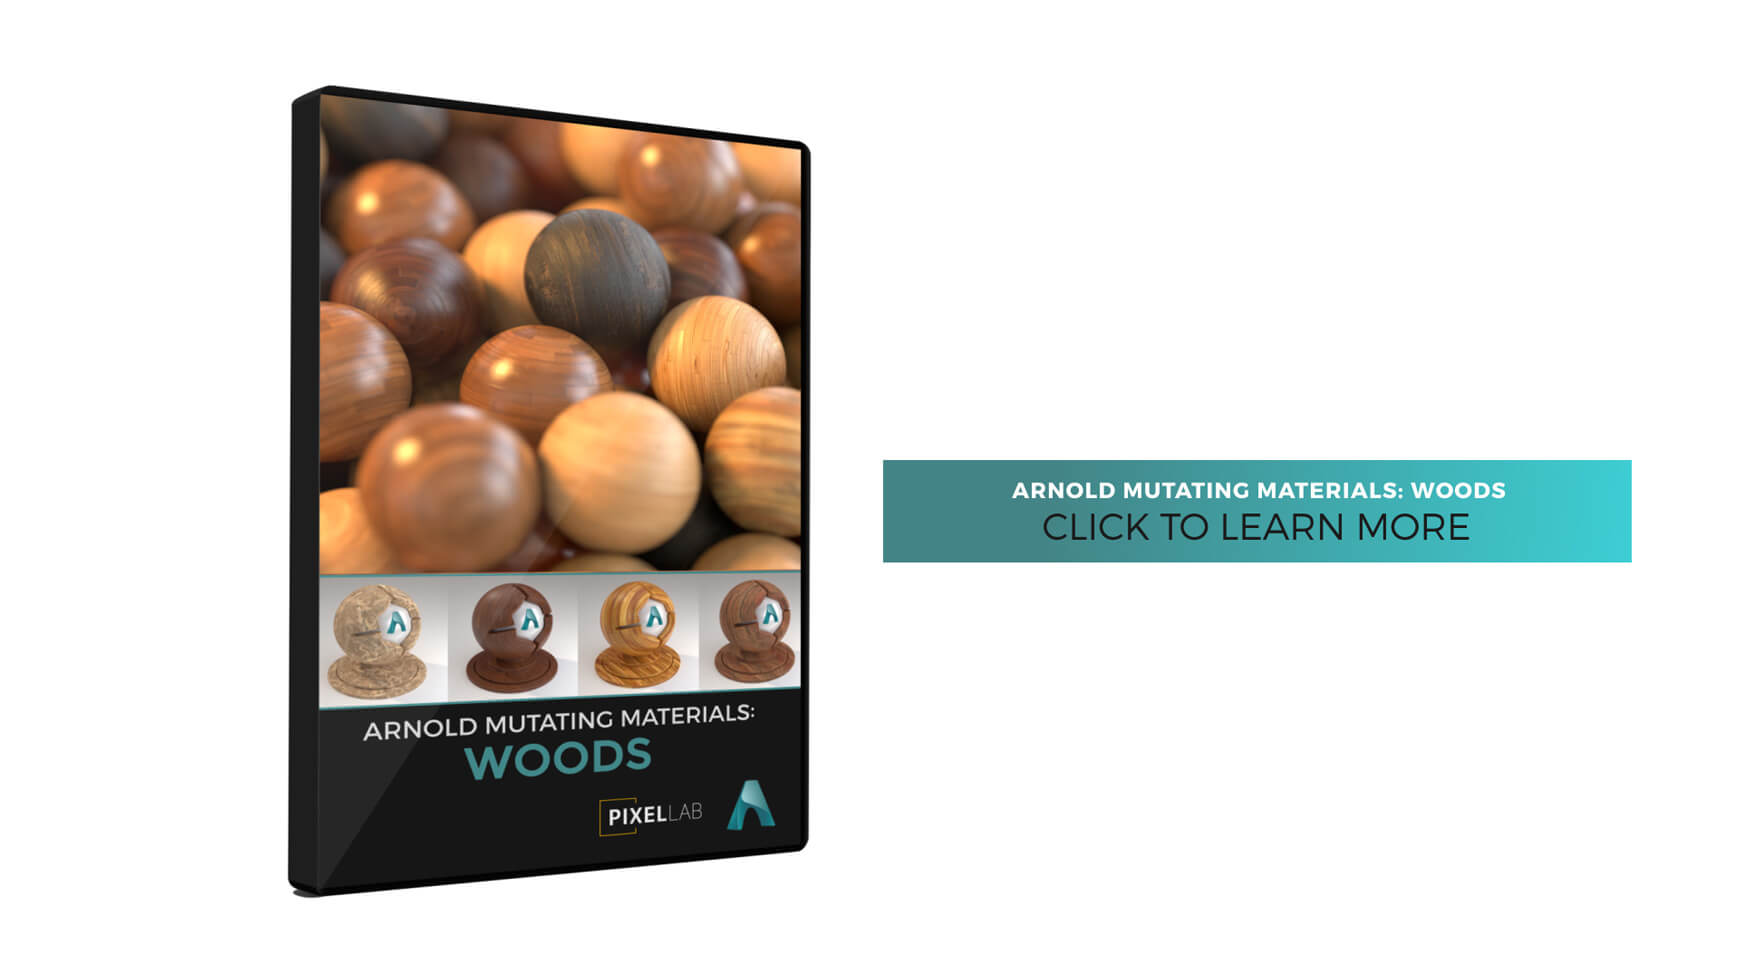 Arnold Mutating Materials Woods Sale